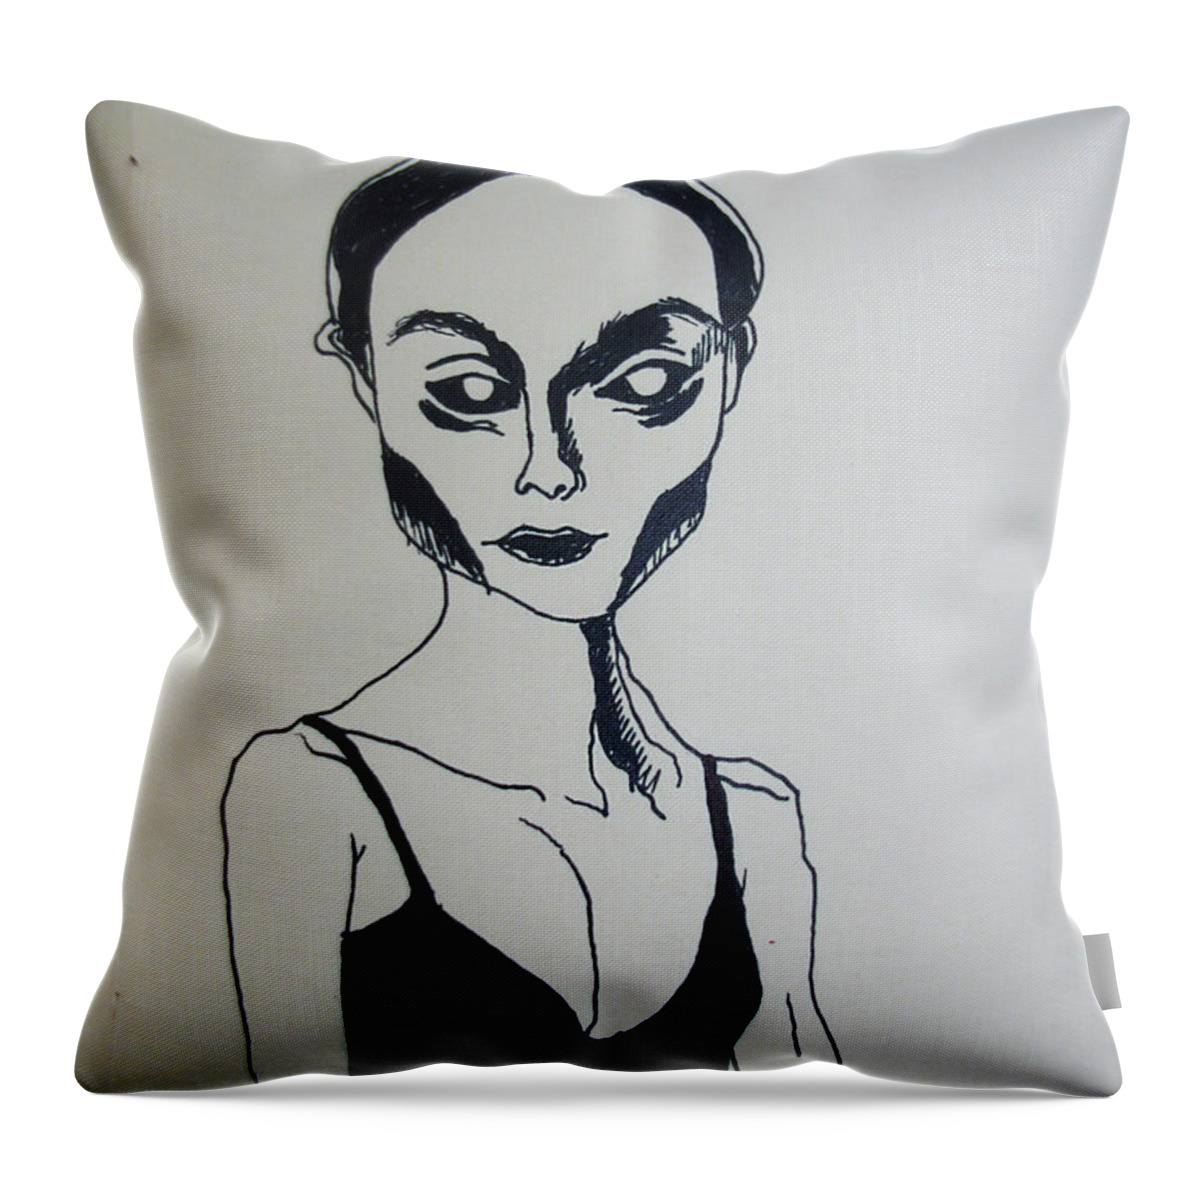  Black Throw Pillow featuring the drawing Essence Of Black Dimension by Gella Goring